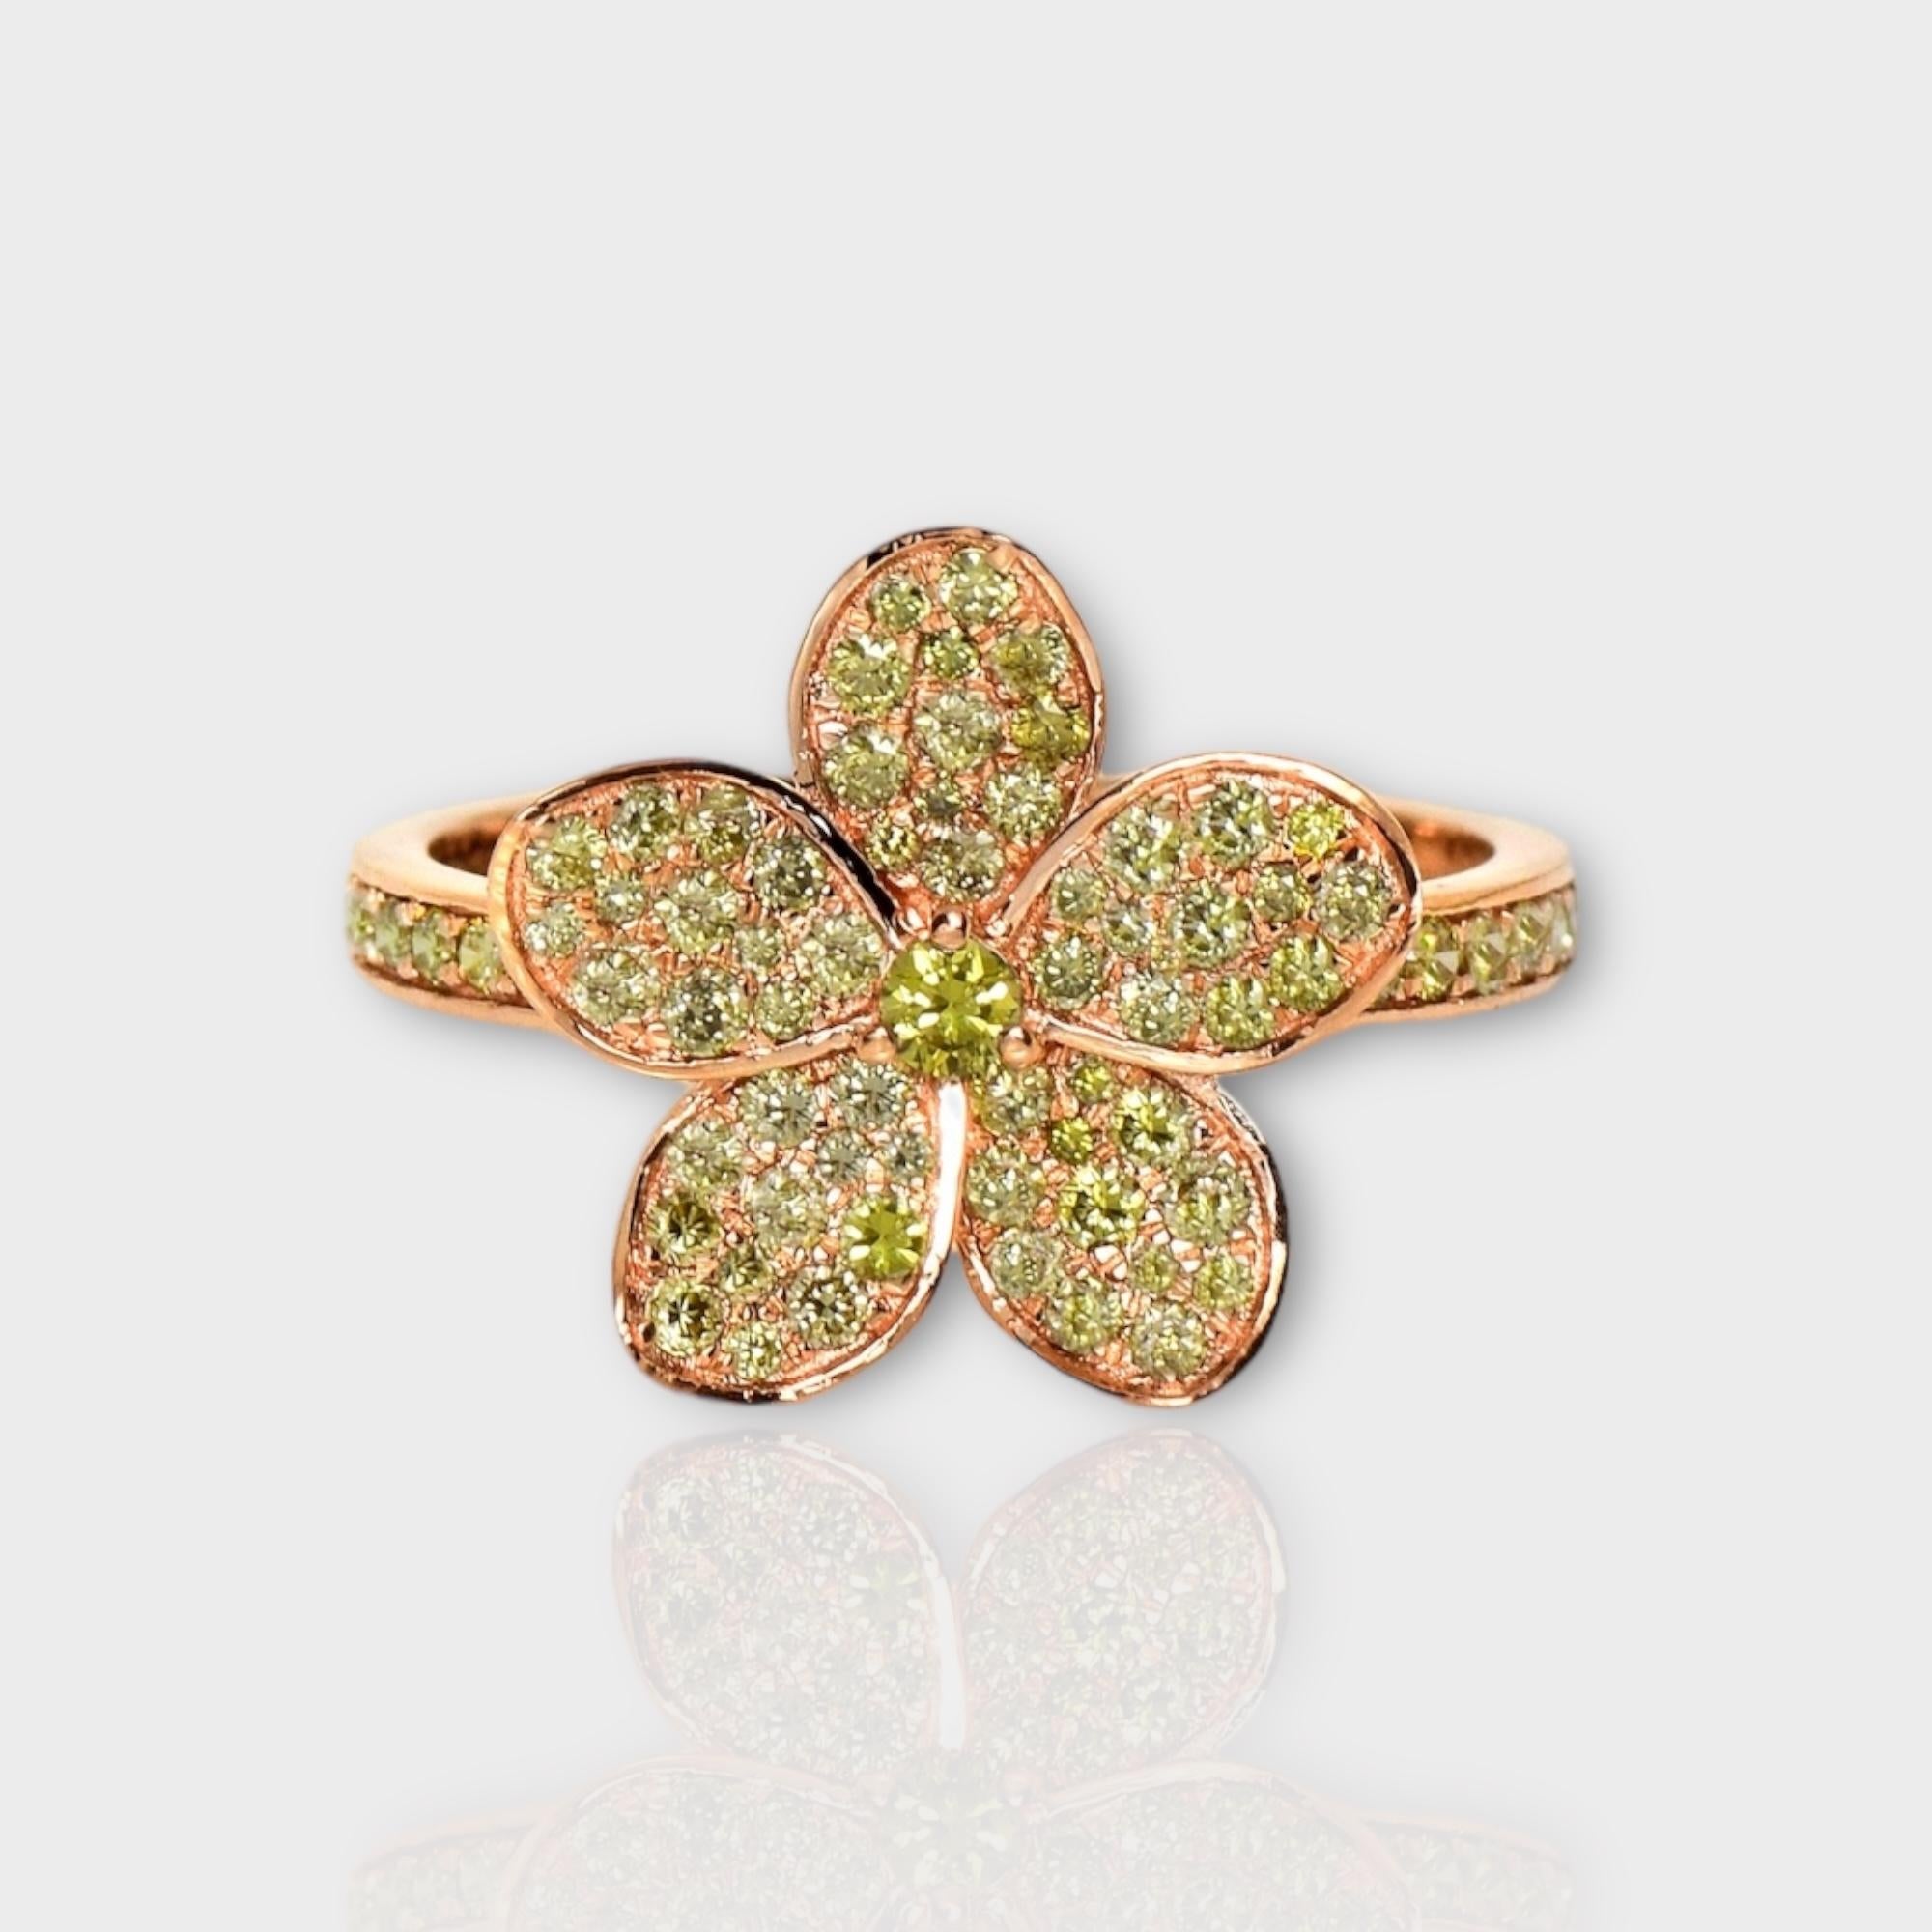 *IGI 14K 0.66 ct Natural Greenish Yellow Diamond Flower Design Engagement Ring*

This band features a stunning design with flowers crafted from 14K rose gold. It is set with natural, intense greenish-yellow diamonds weighing 0.66 carats.

This ring